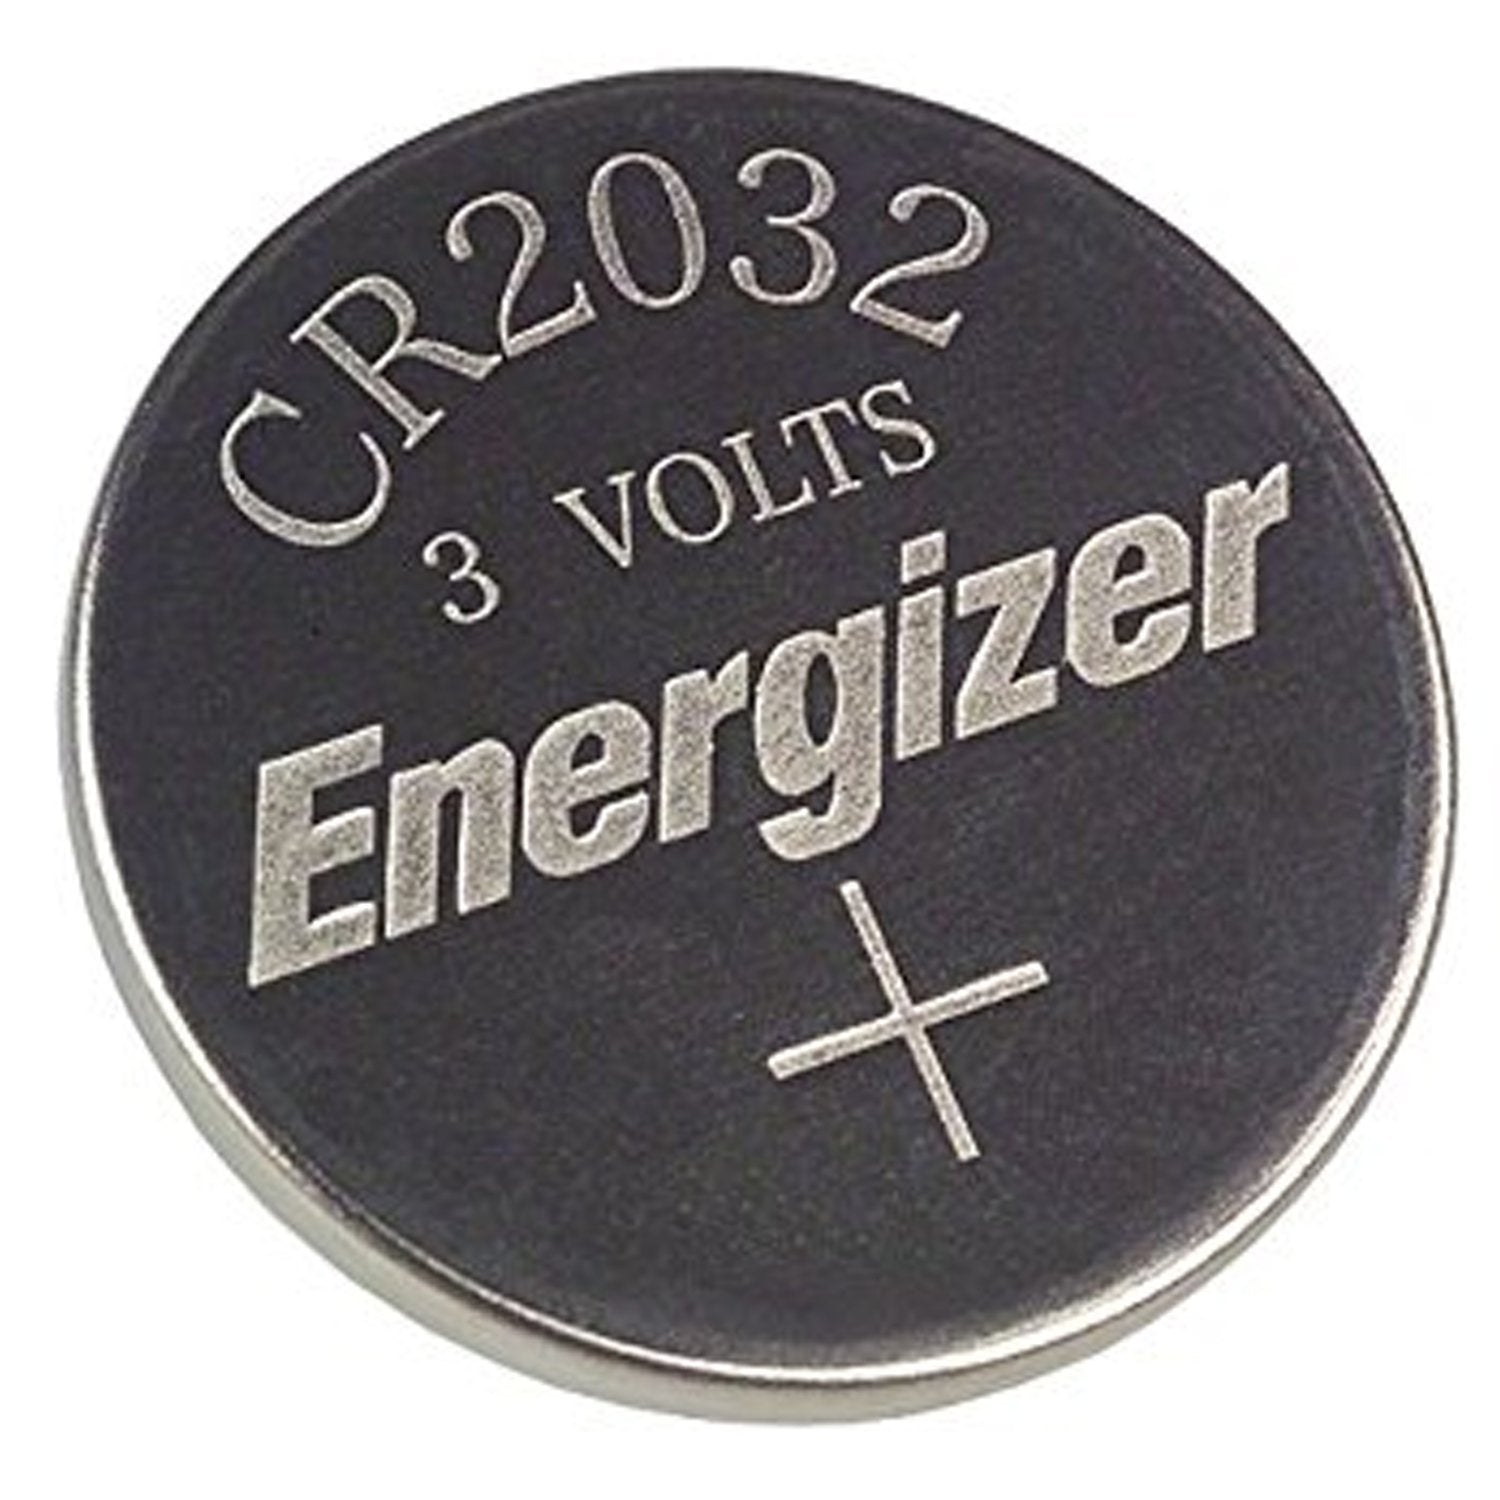 energizer-watch-battery-cross-reference-guide-chart-table-uk-2020-tradenrg-uk